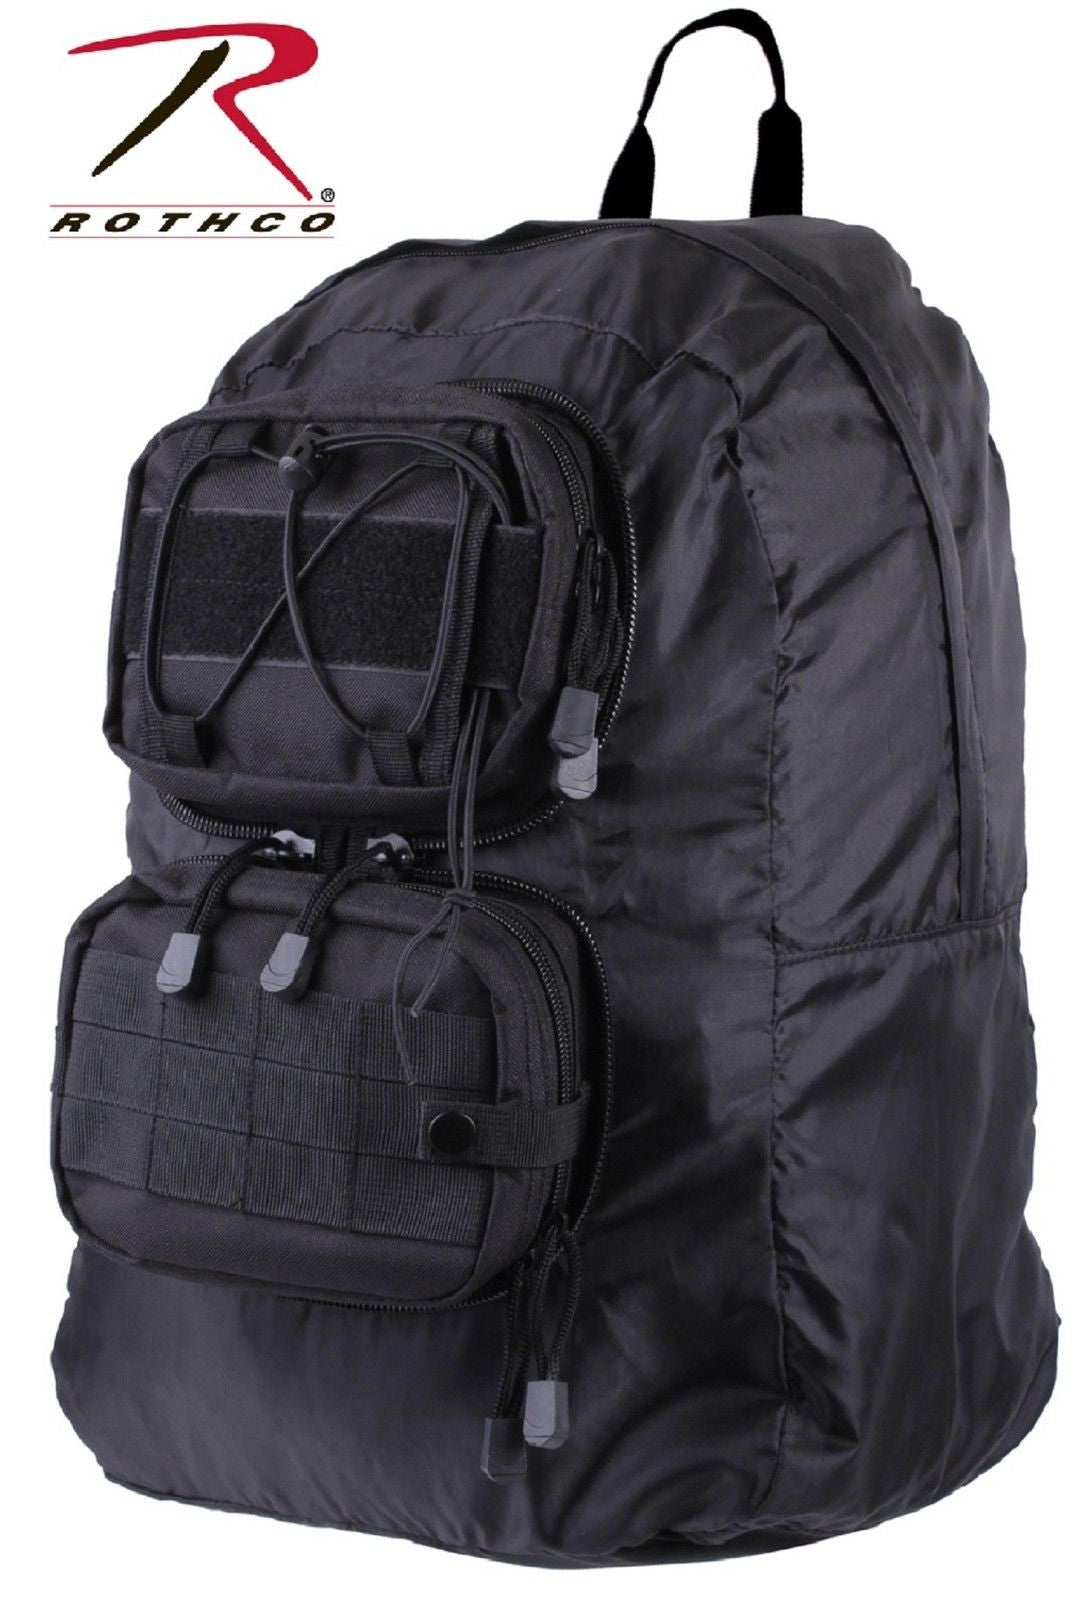 Rothco Black Tactical Foldable Backpack